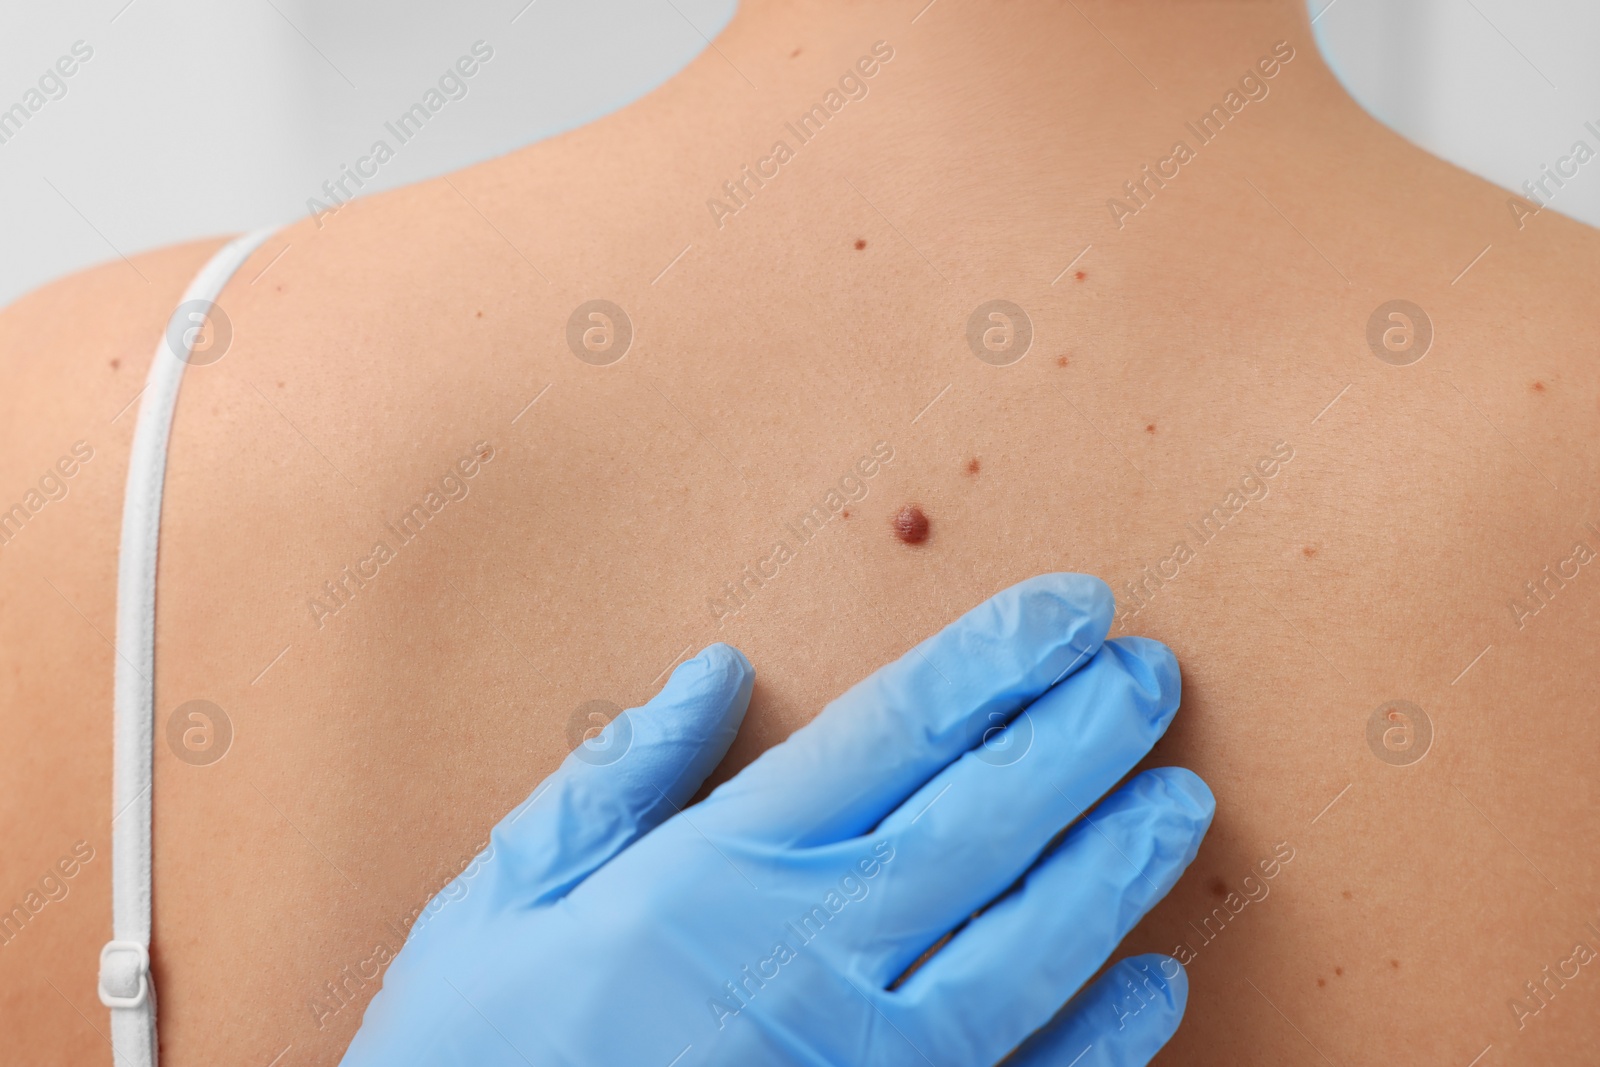 Photo of Dermatologist in rubber glove examining patient's birthmark, closeup view